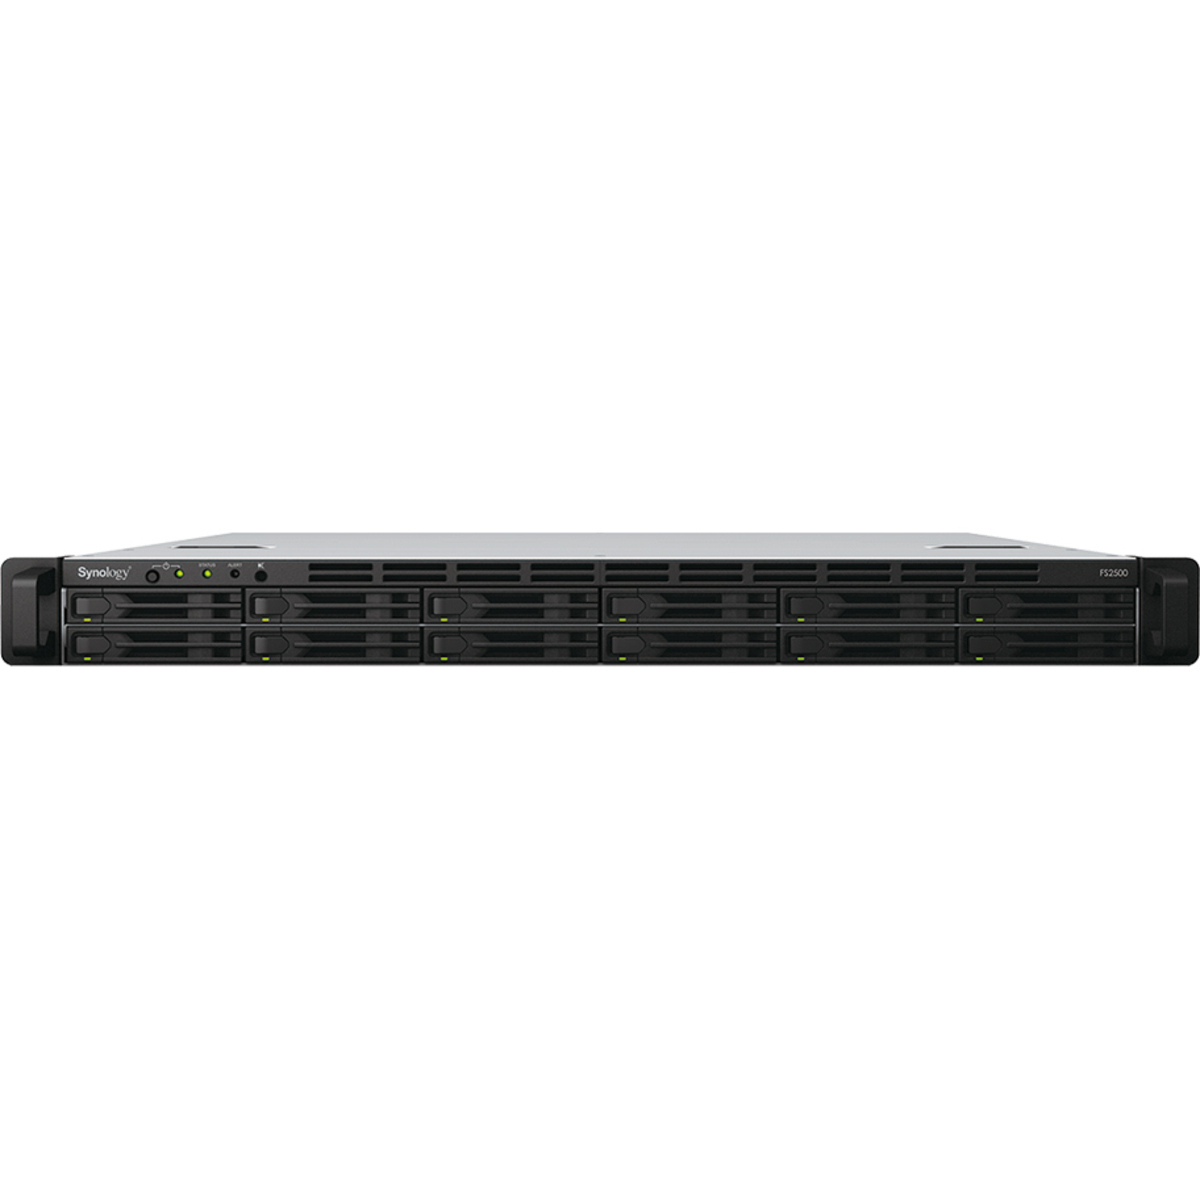 Synology FlashStation FS2500 9tb 12-Bay RackMount Large Business / Enterprise NAS - Network Attached Storage Device 9x1tb Crucial MX500 CT1000MX500SSD1 2.5 560/510MB/s SATA 6Gb/s SSD CONSUMER Class Drives Installed - Burn-In Tested - FREE RAM UPGRADE FlashStation FS2500